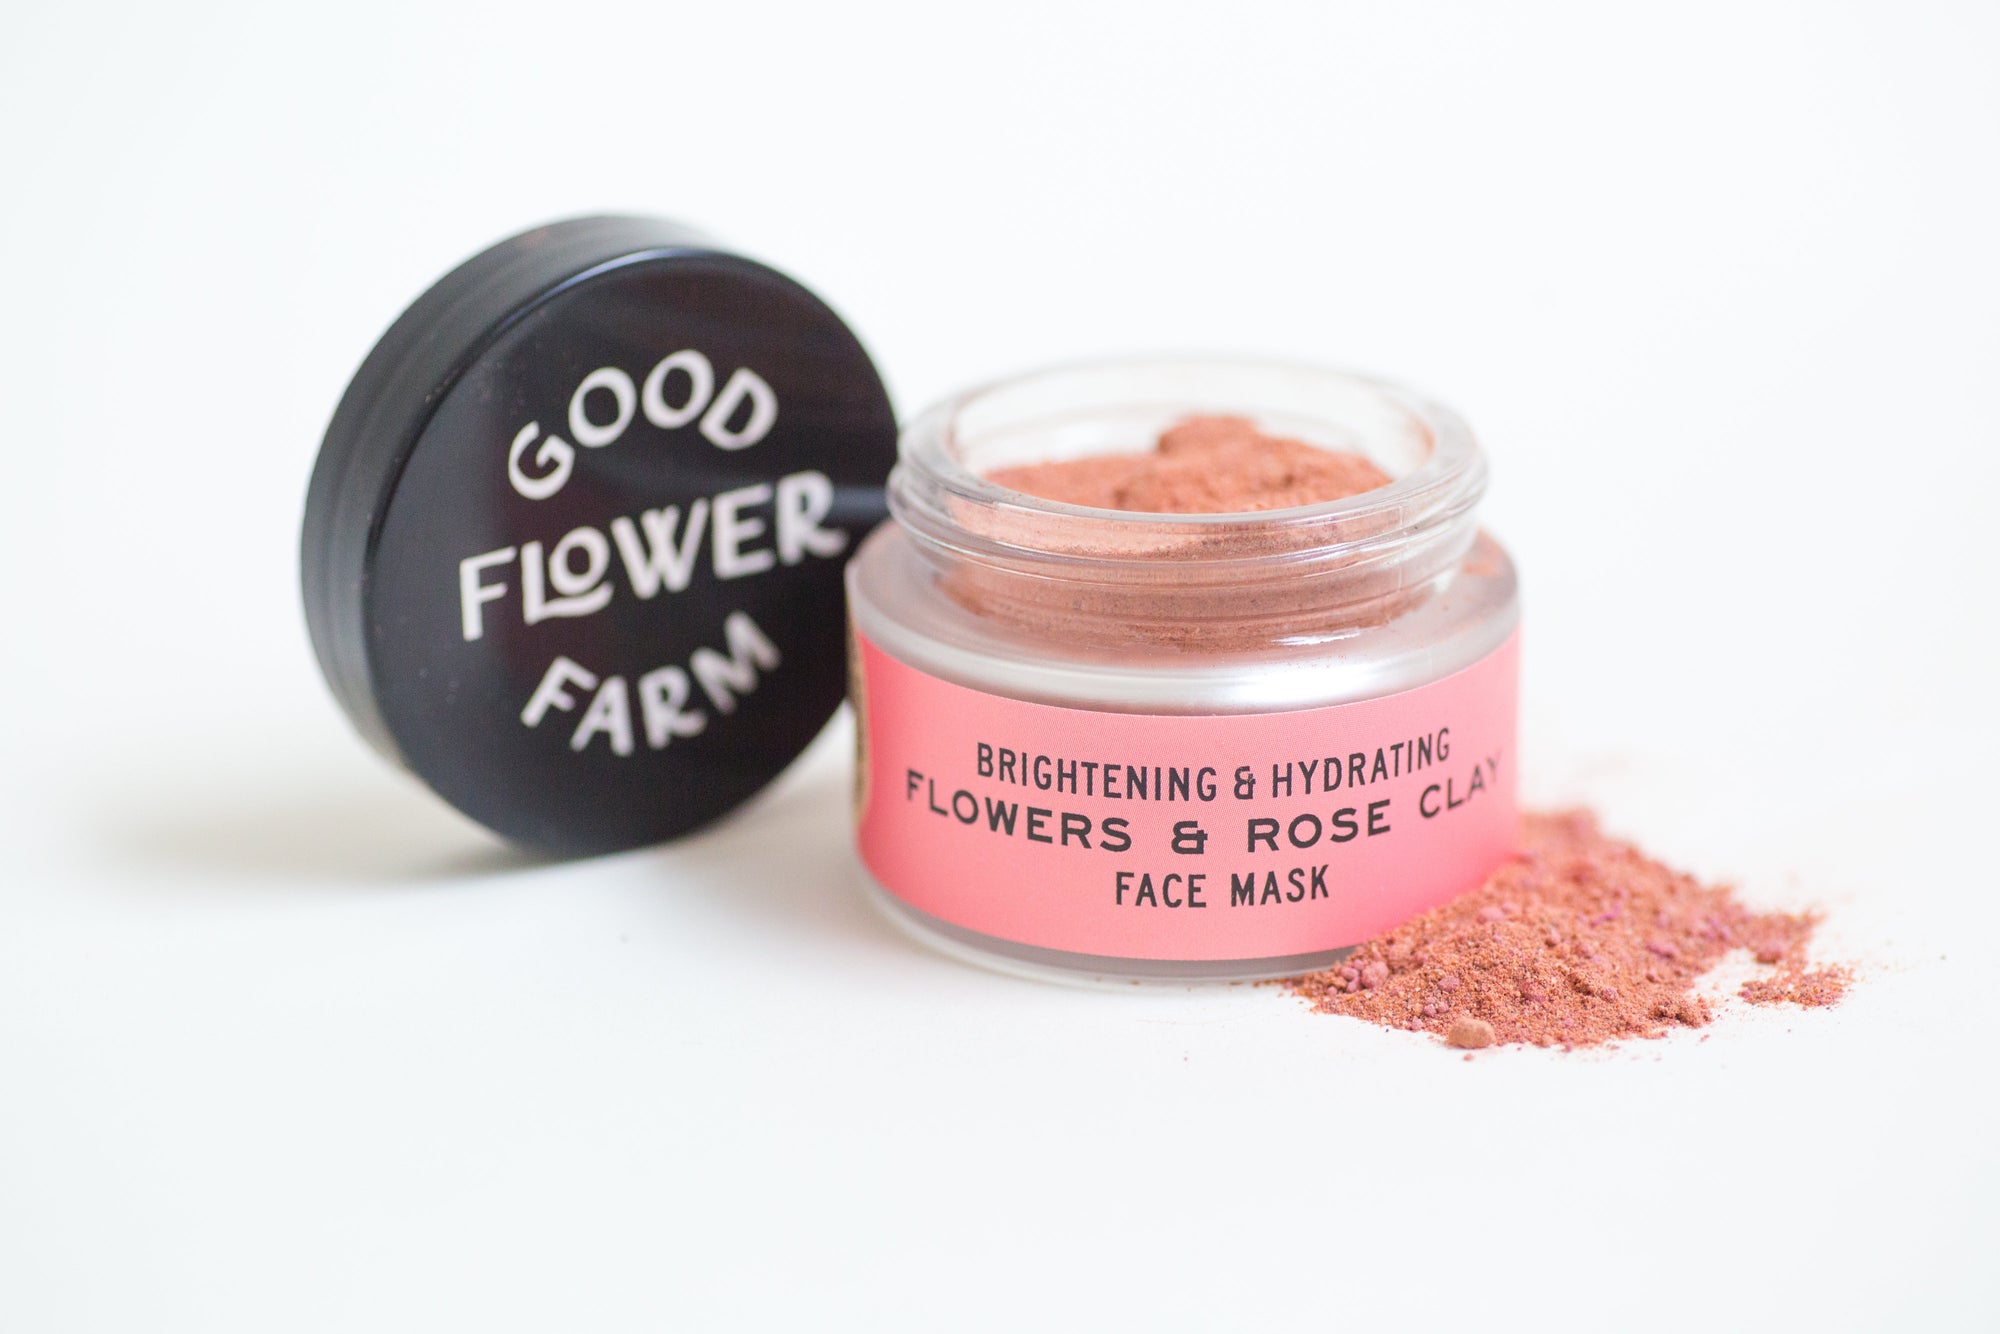 Flowers & Rose Clay Face Mask Tester